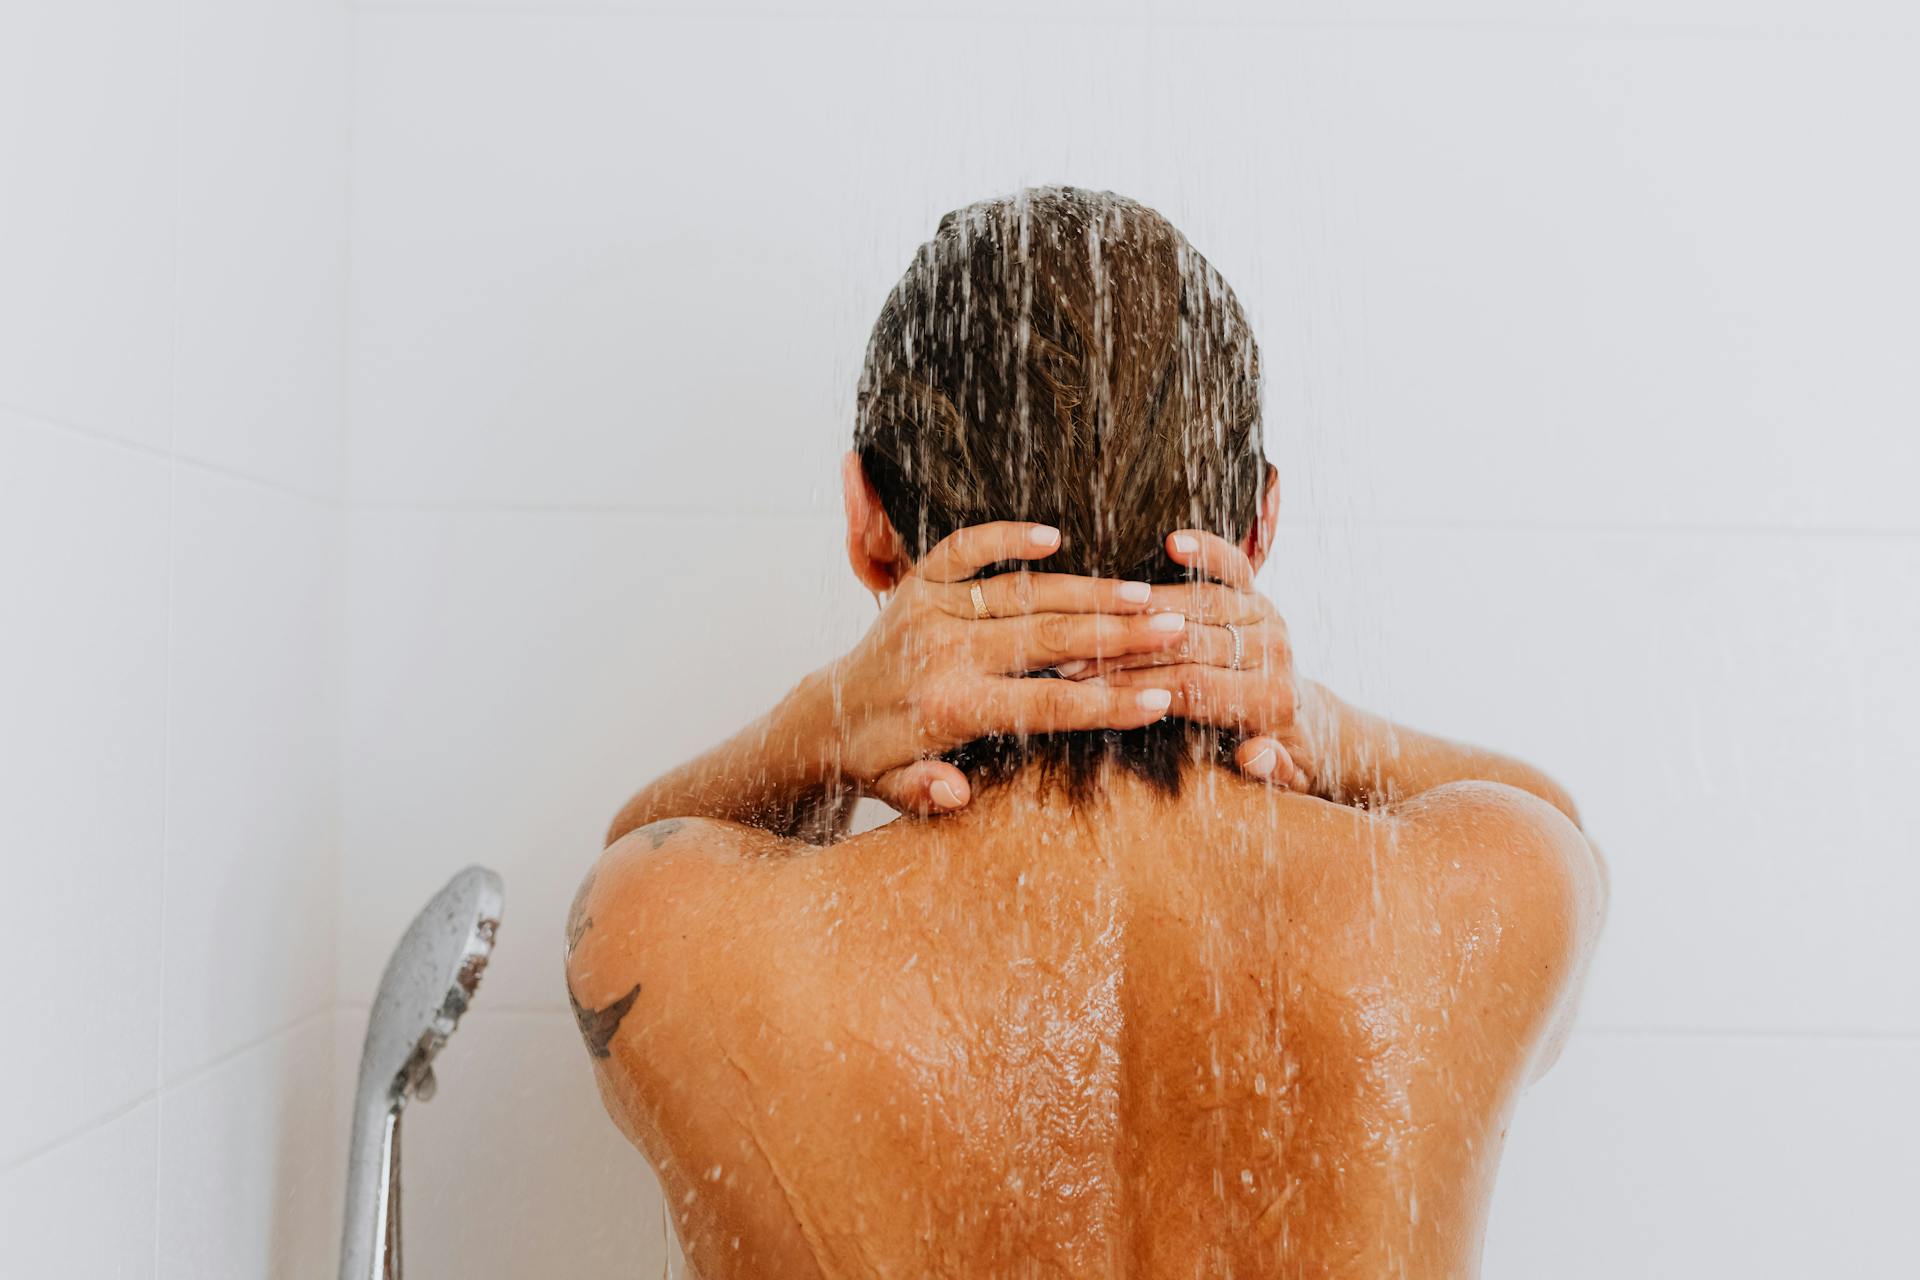 A person taking a shower | Source: Pexels